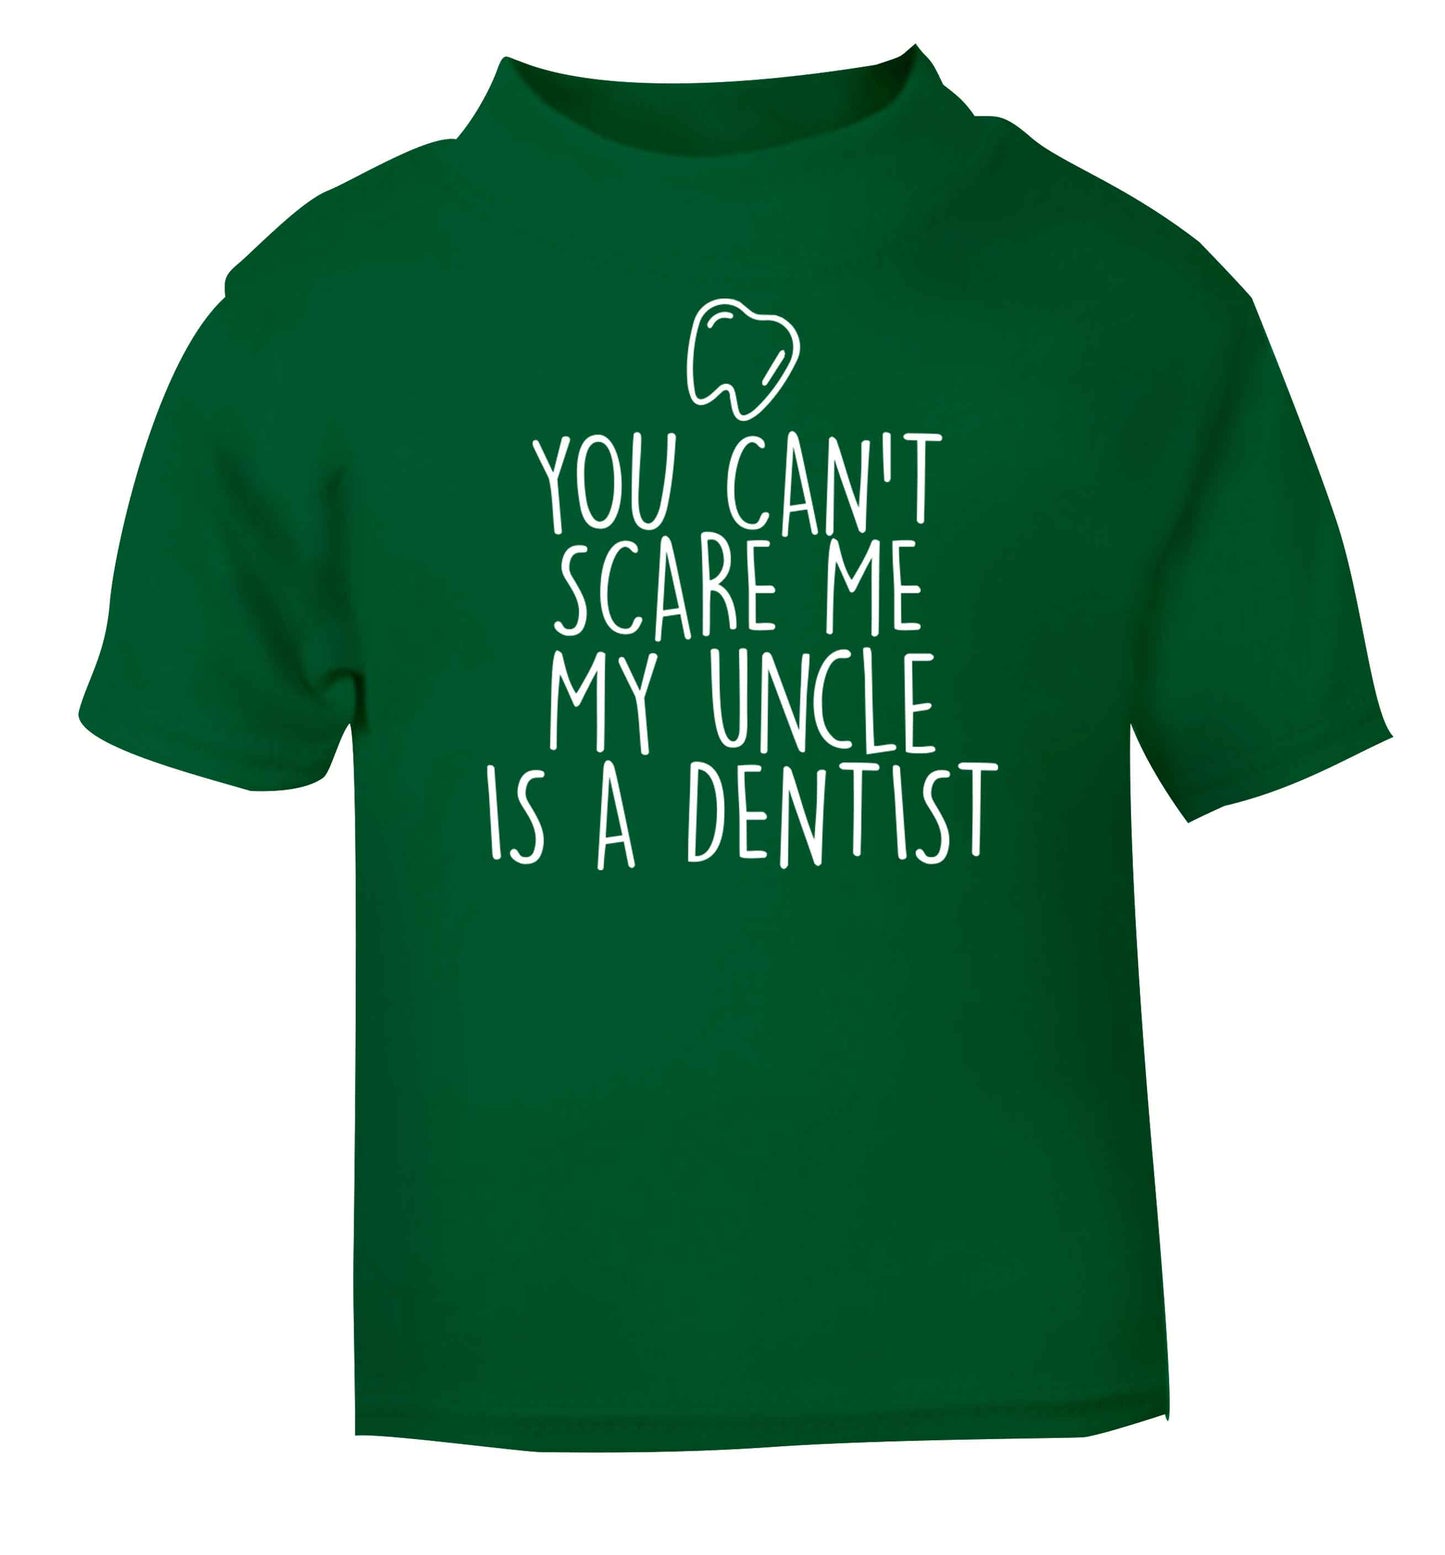 You can't scare me my uncle is a dentist green baby toddler Tshirt 2 Years